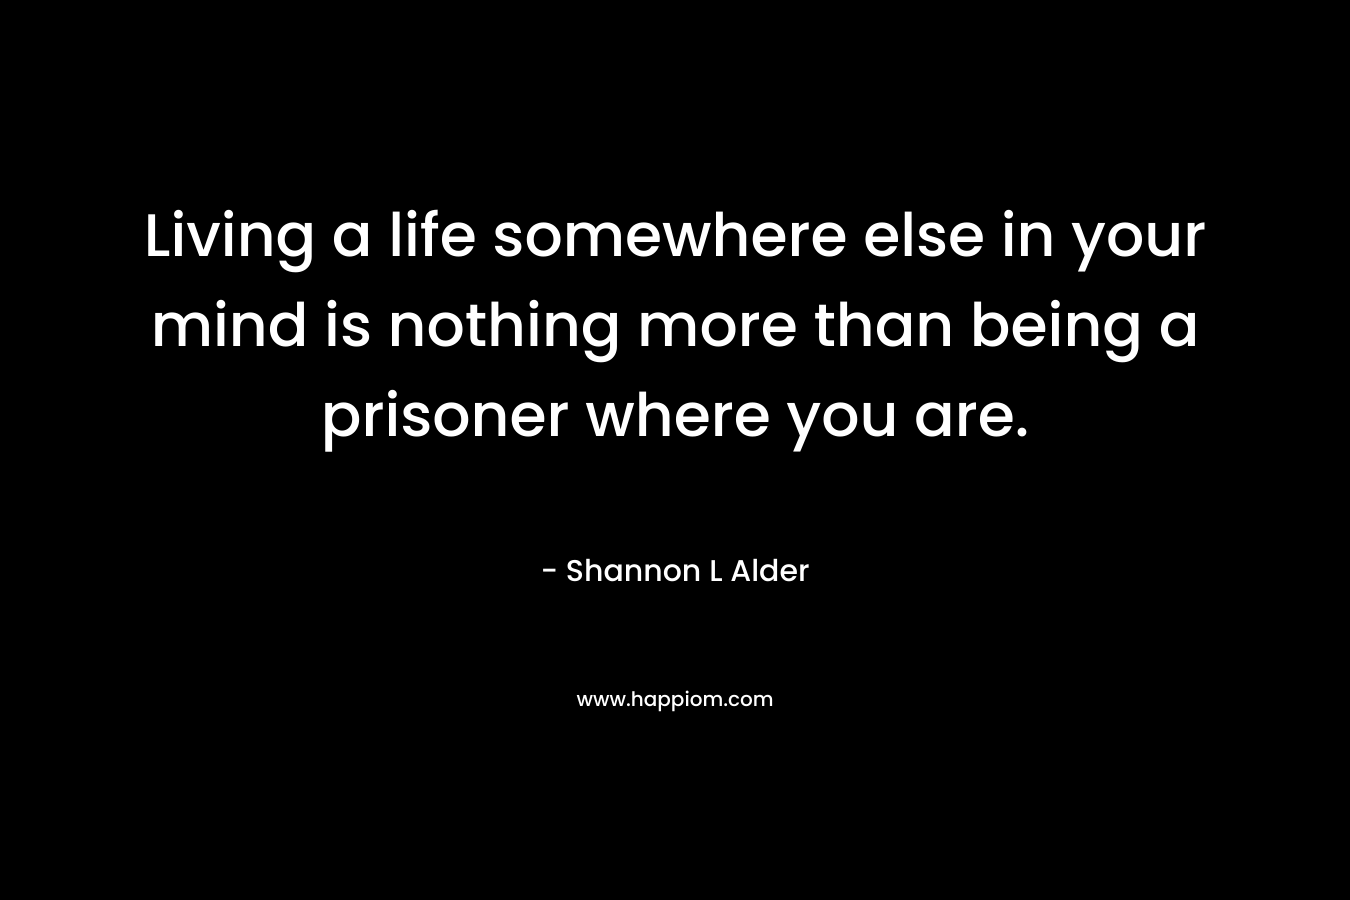 Living a life somewhere else in your mind is nothing more than being a prisoner where you are.